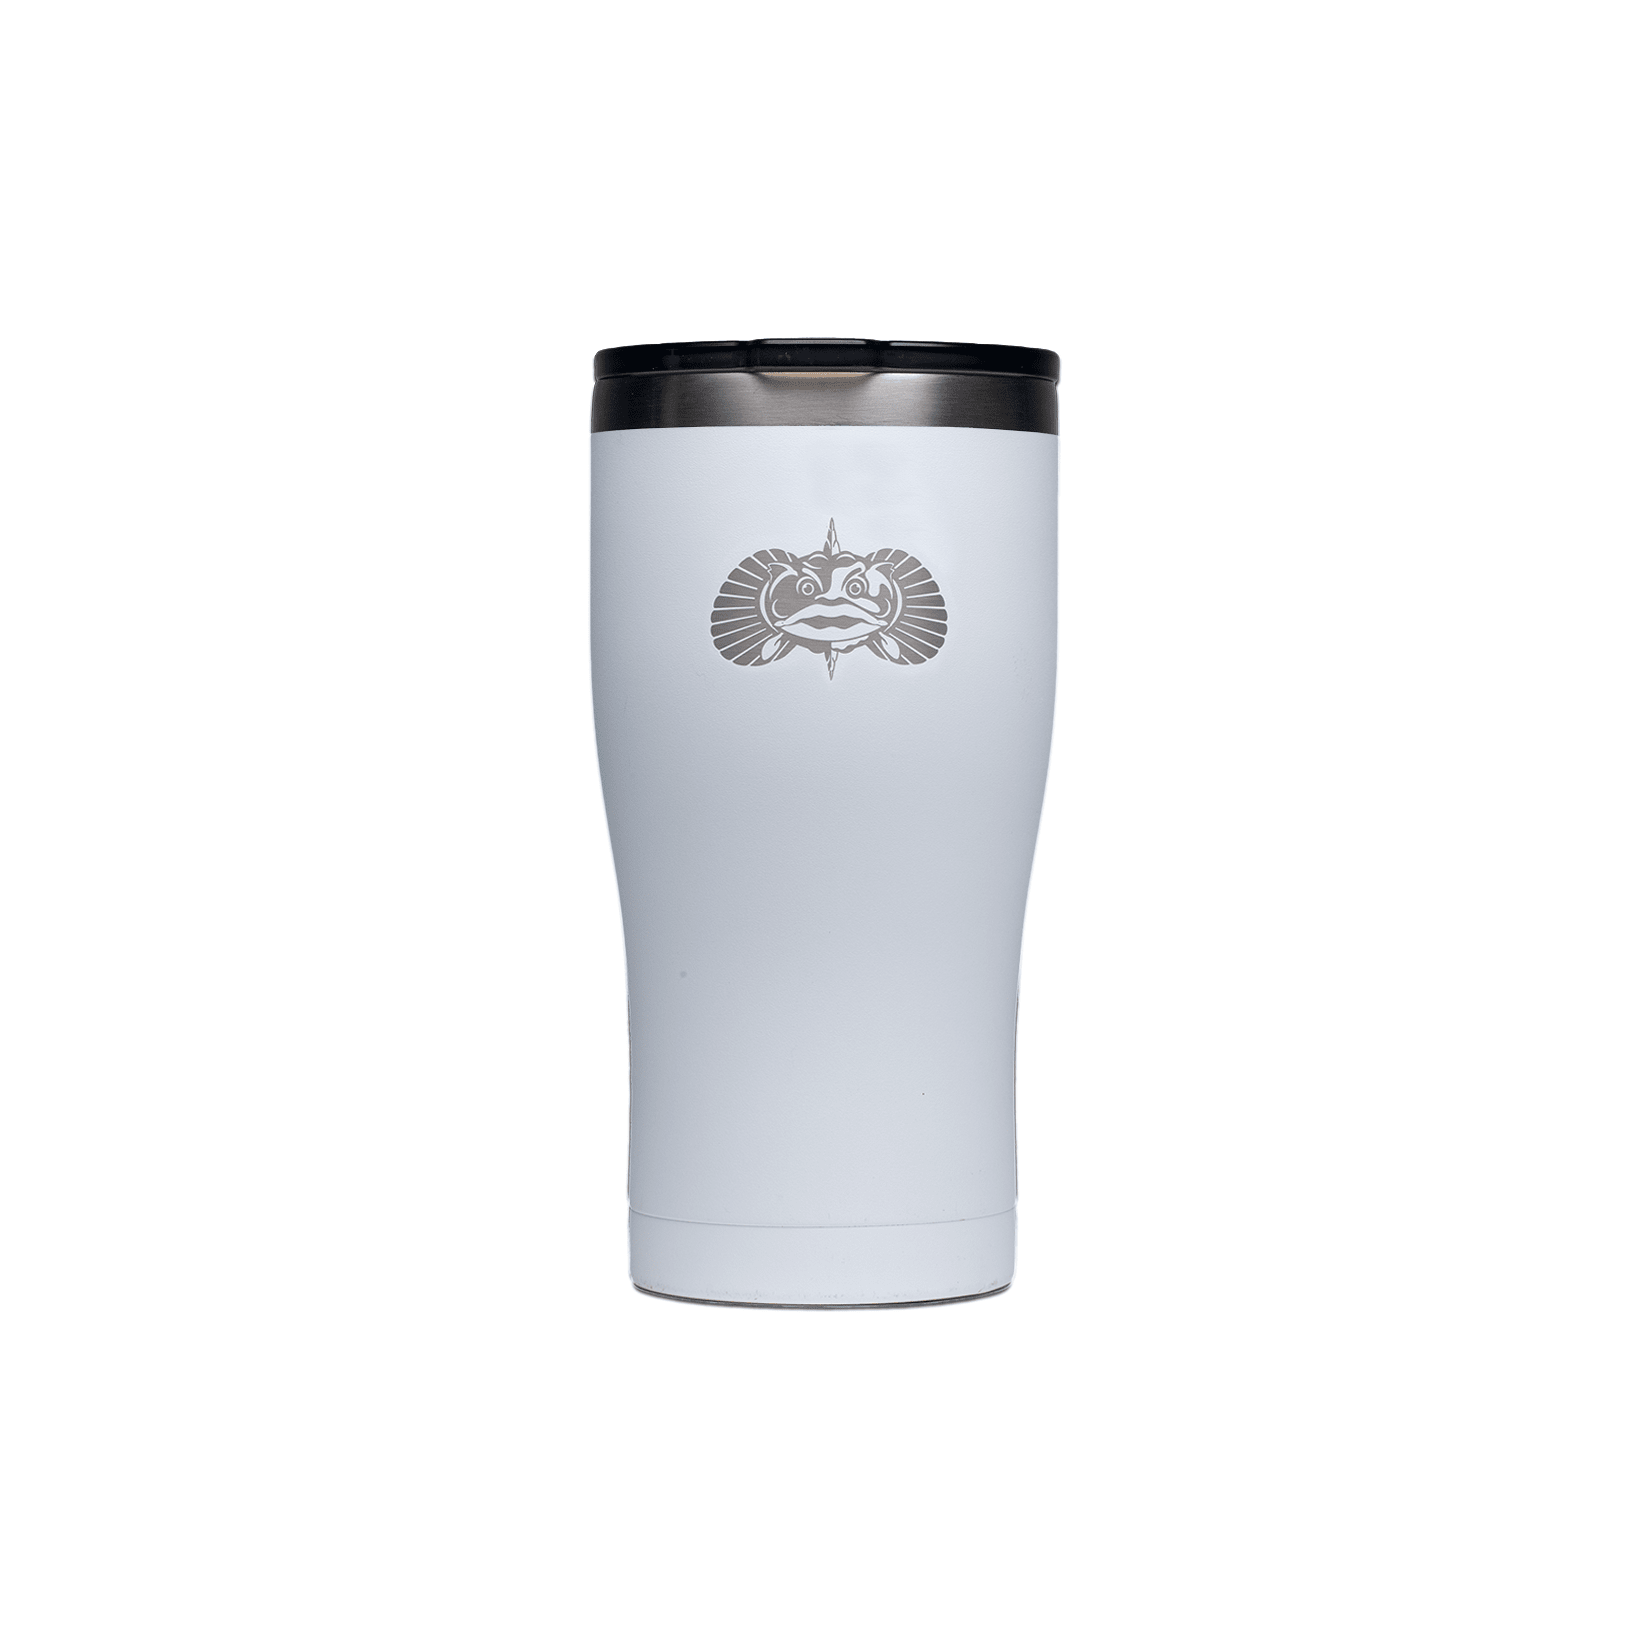 https://image.fisheriessupply.com/c_lpad,dpr_3.0,w_550,h_550,d_imageComingSoon-tiff/f_auto,q_auto/v1/static-images/toadfish-outfitters-30oz-tumbler-white-front